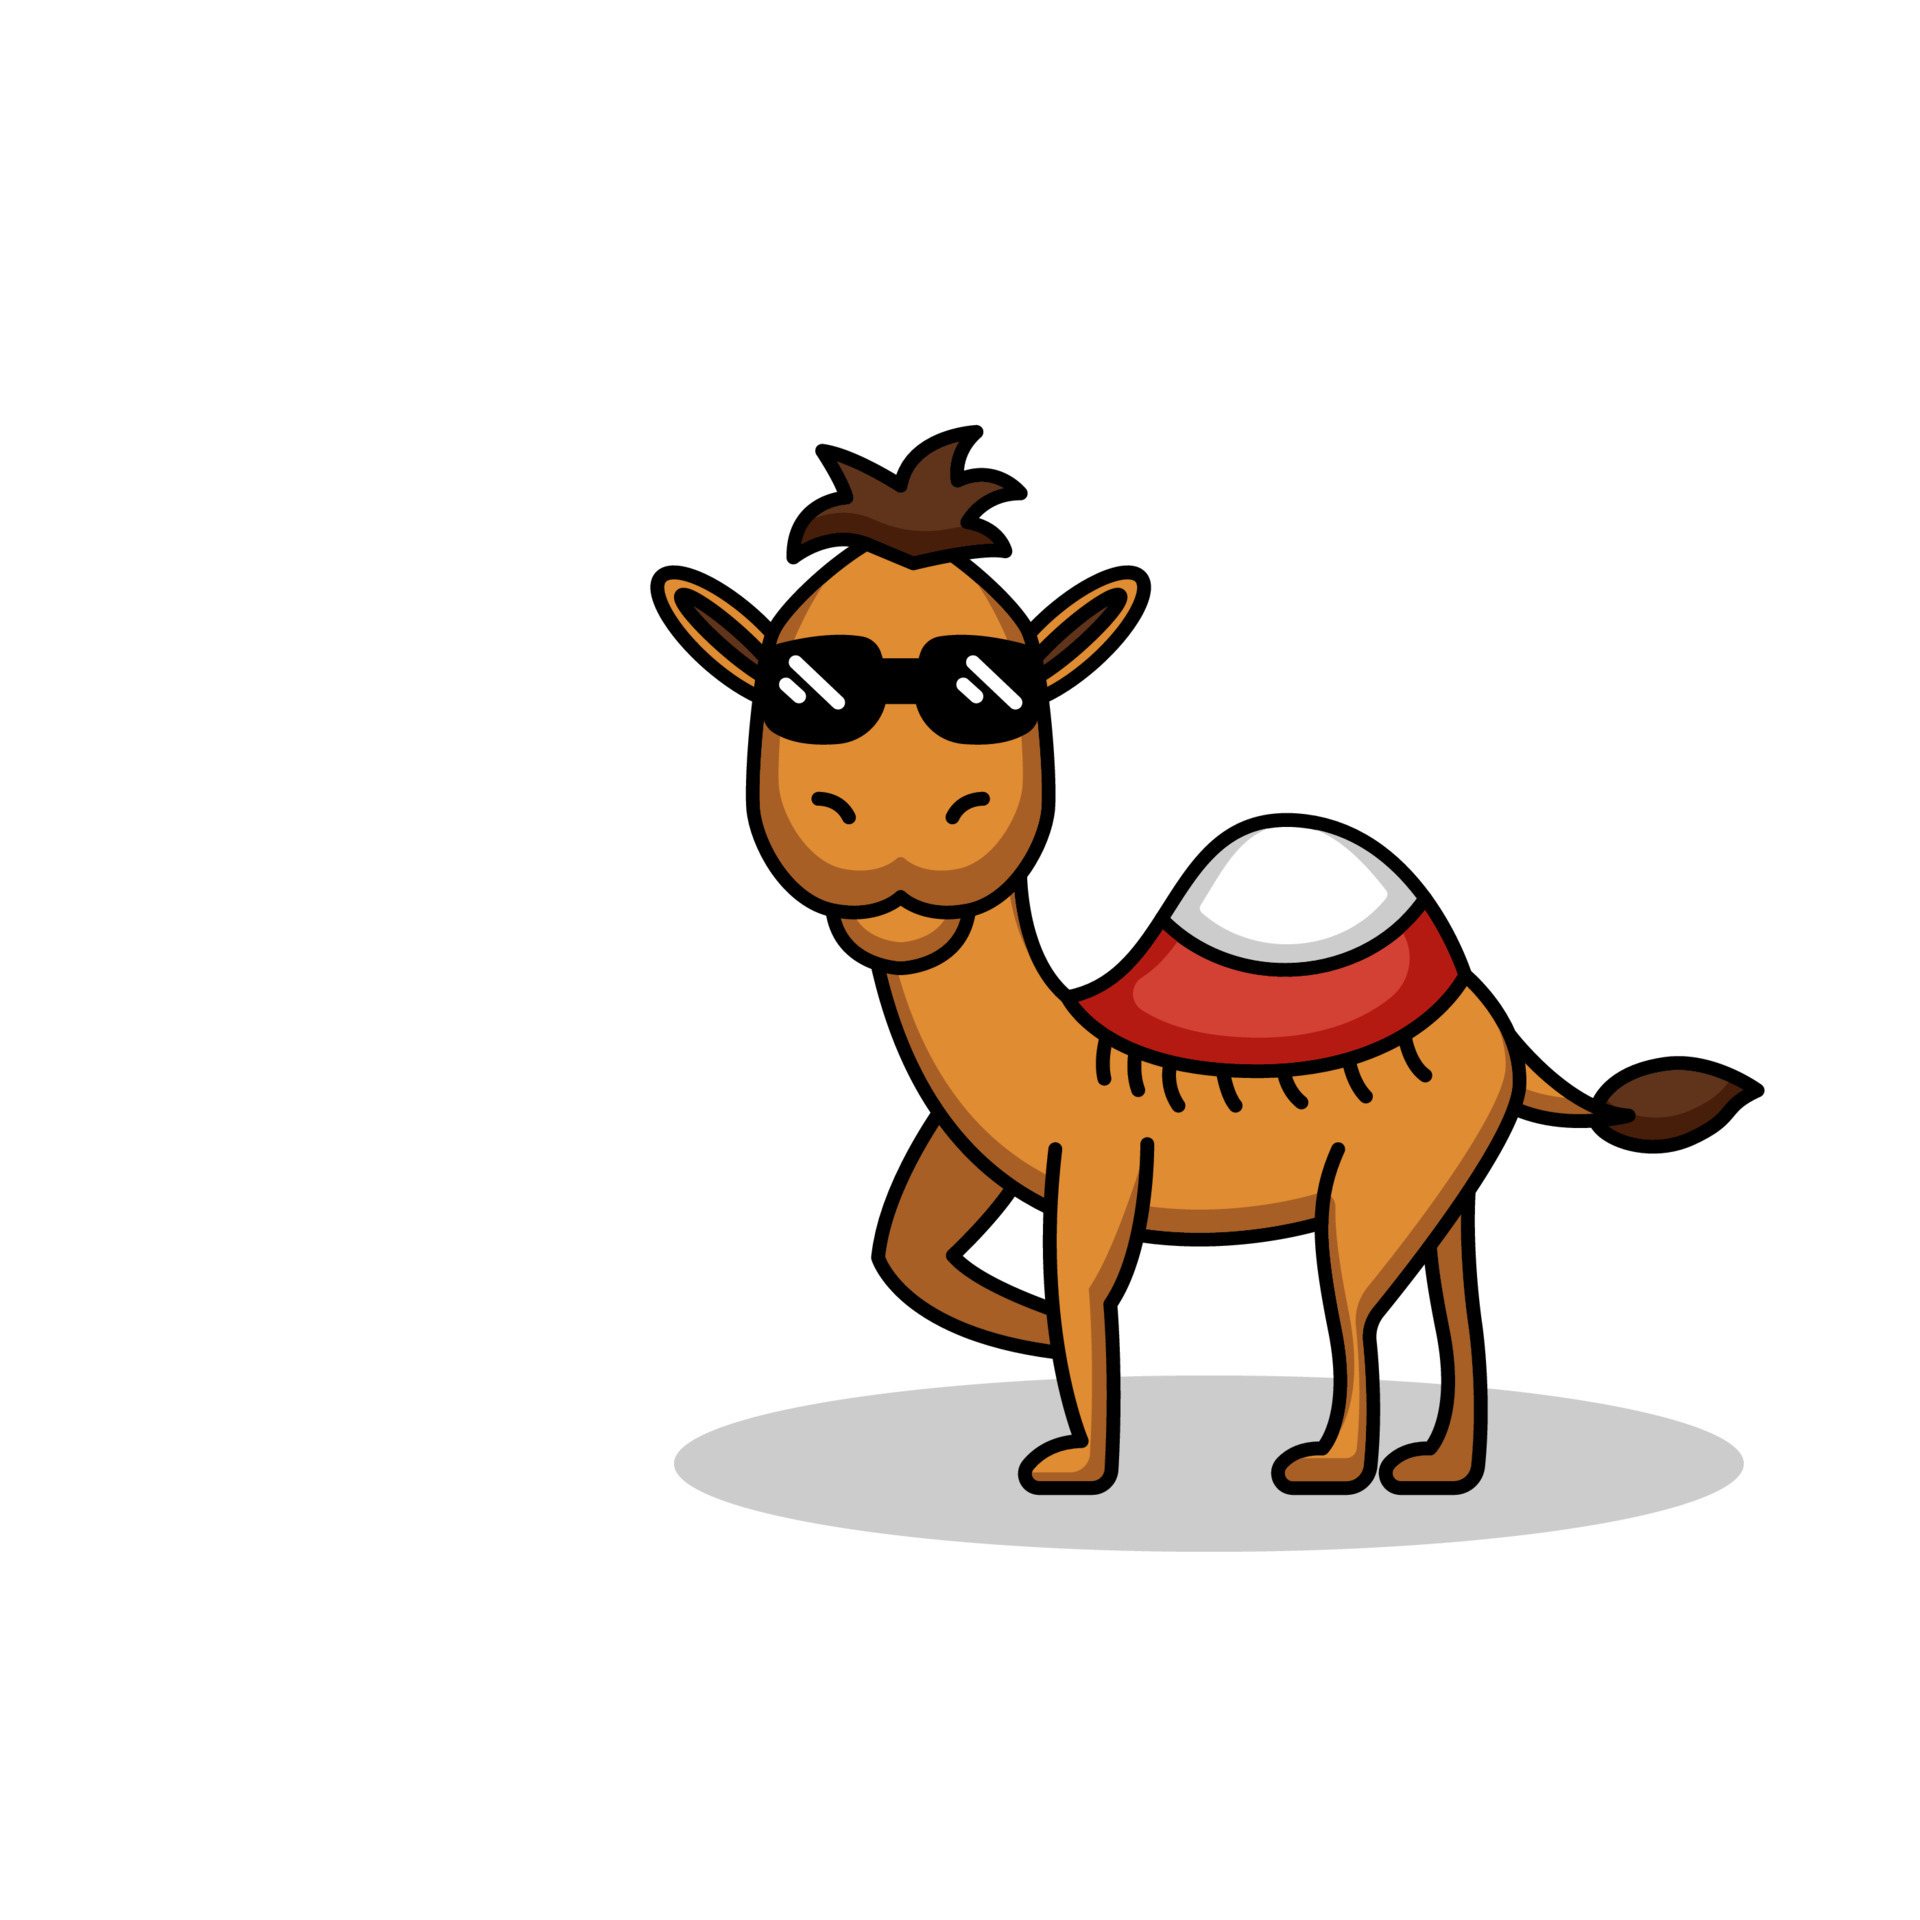 Camel Drawing PNG Transparent Images Free Download | Vector Files | Pngtree